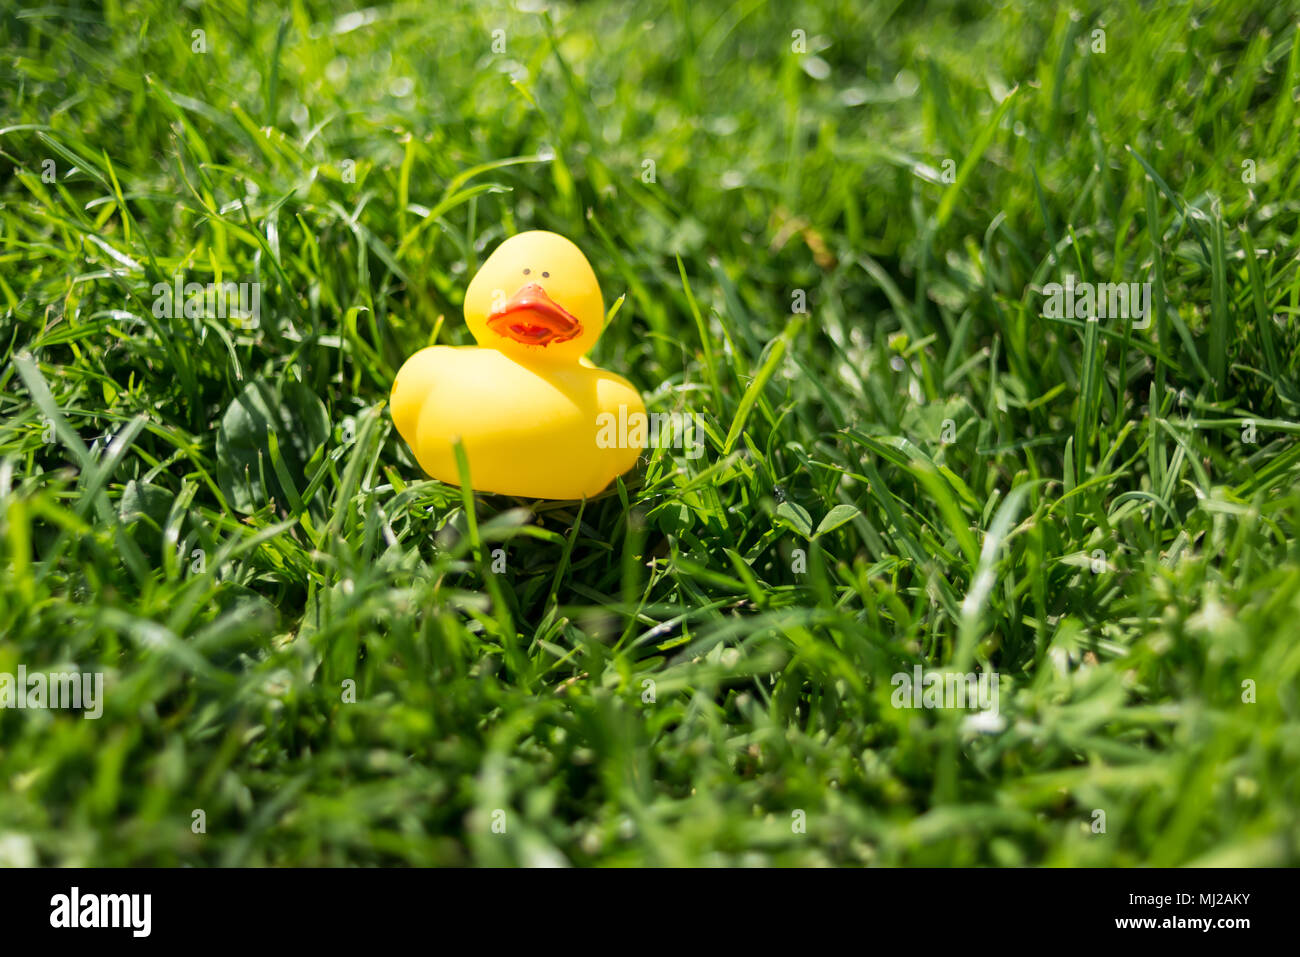 A cute yellow rubber duck floating toy lying on green grass of a garden Stock Photo